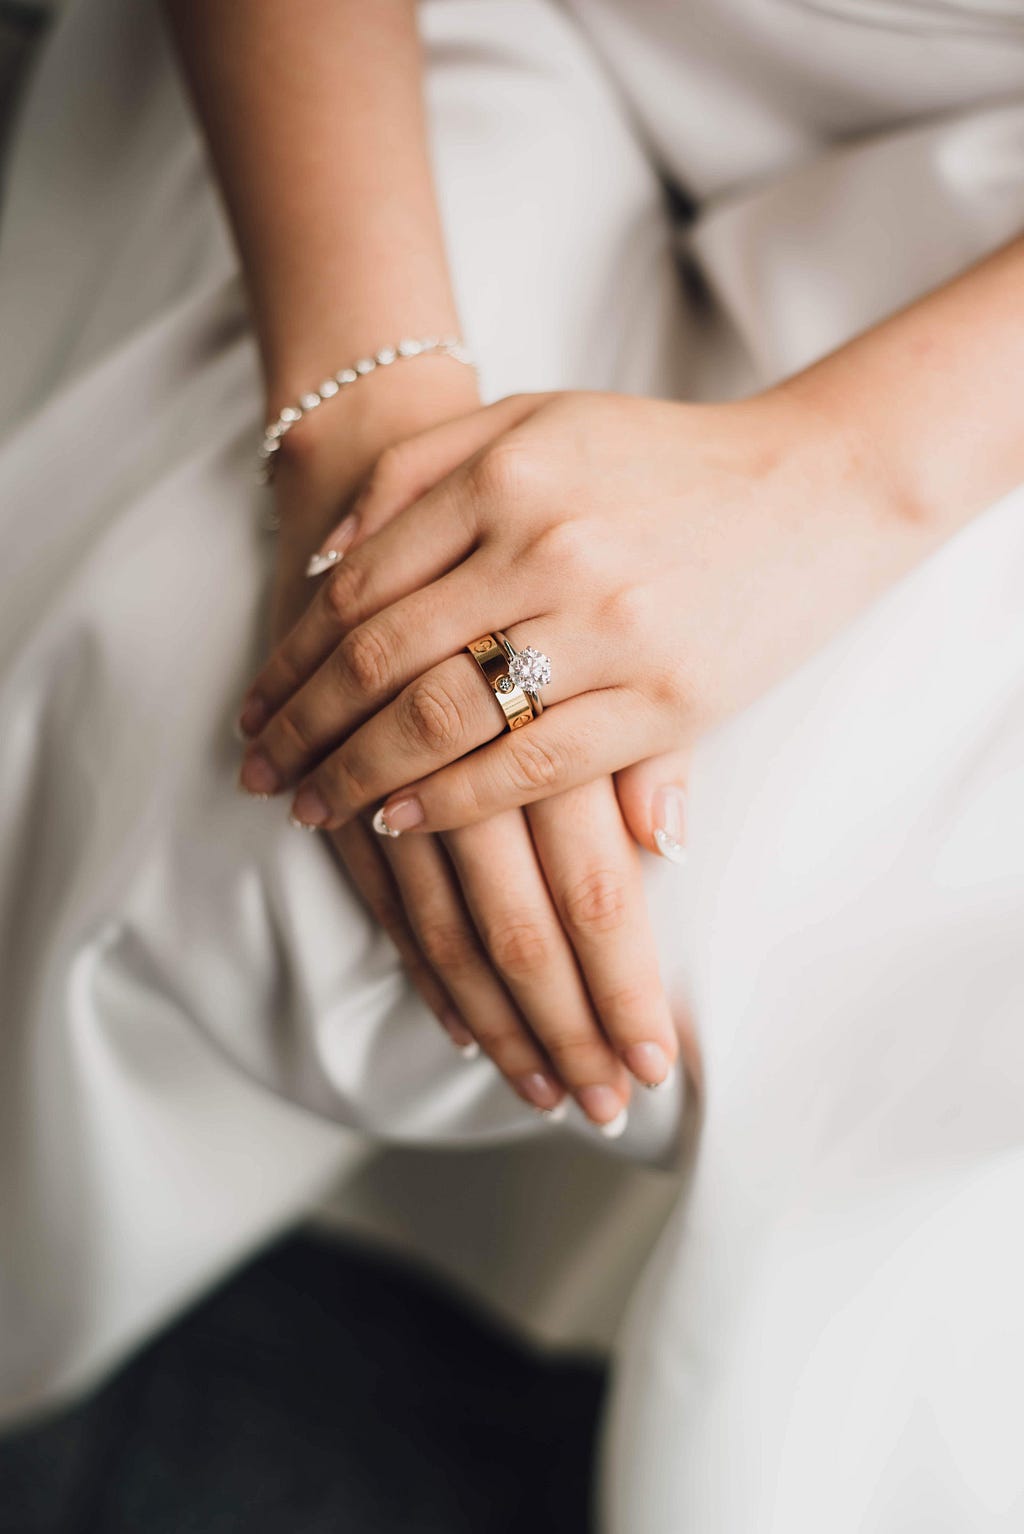 A bride with her hands on her lap showing her engagement ring and wedding band.